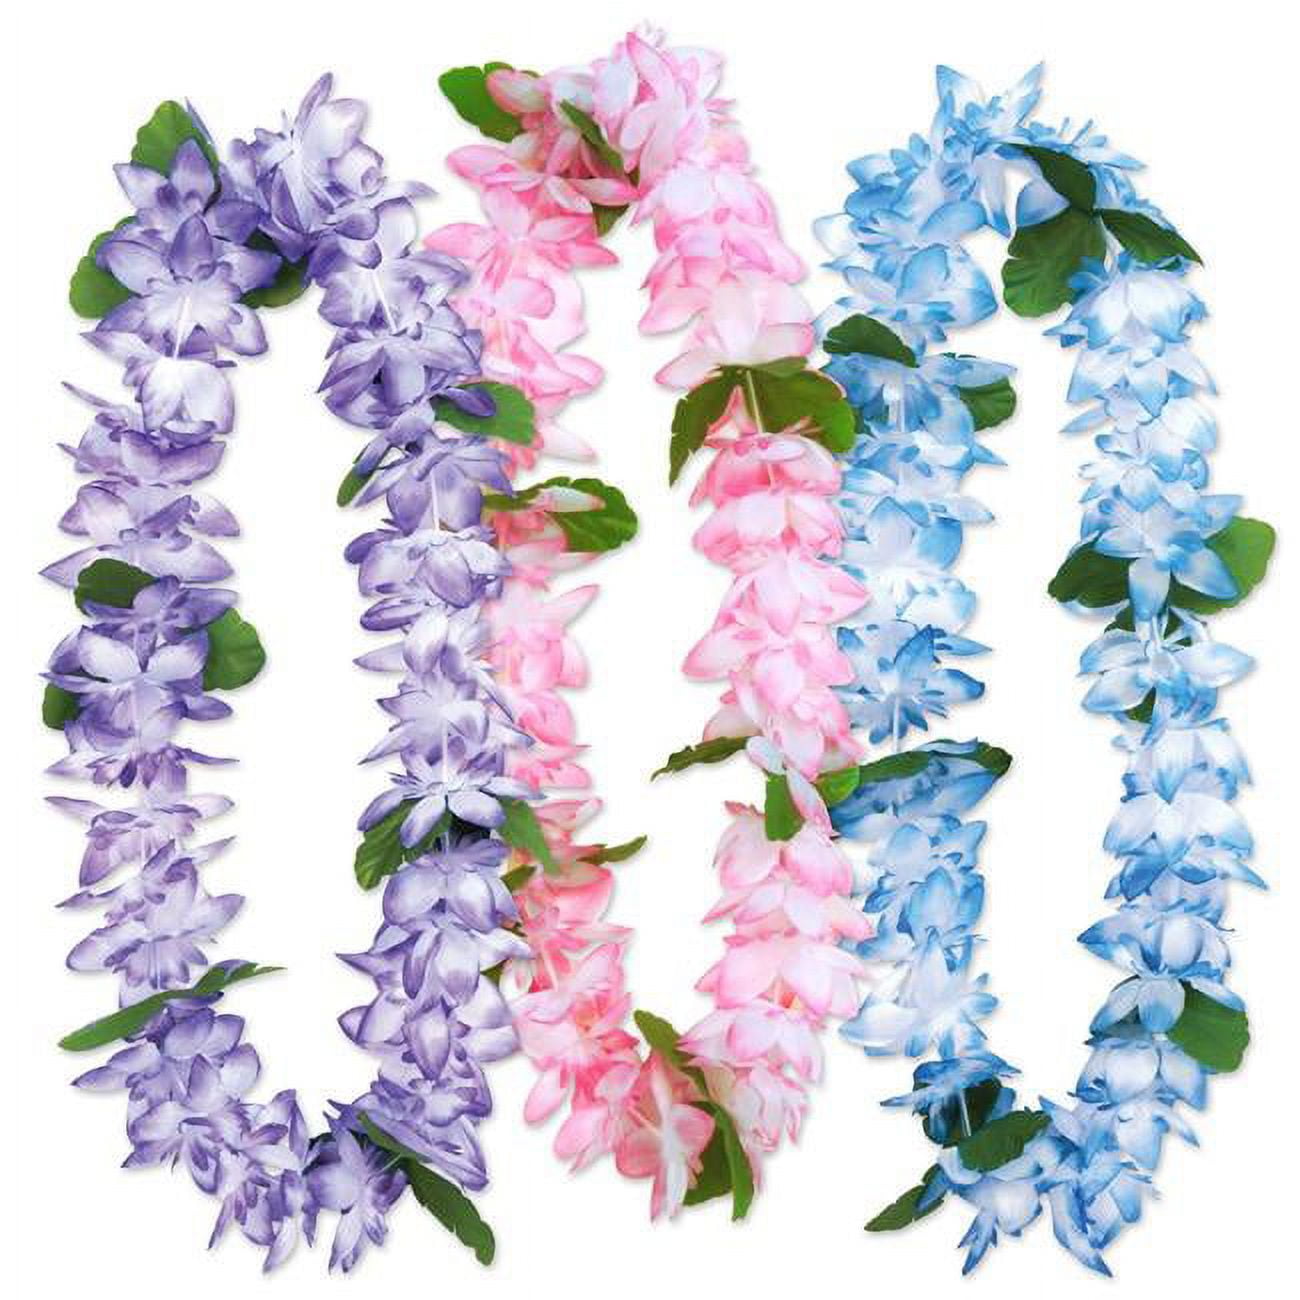 Picture of Beistle 60975 38 in. Island Floral Leis, Assorted Color - Pack of 6